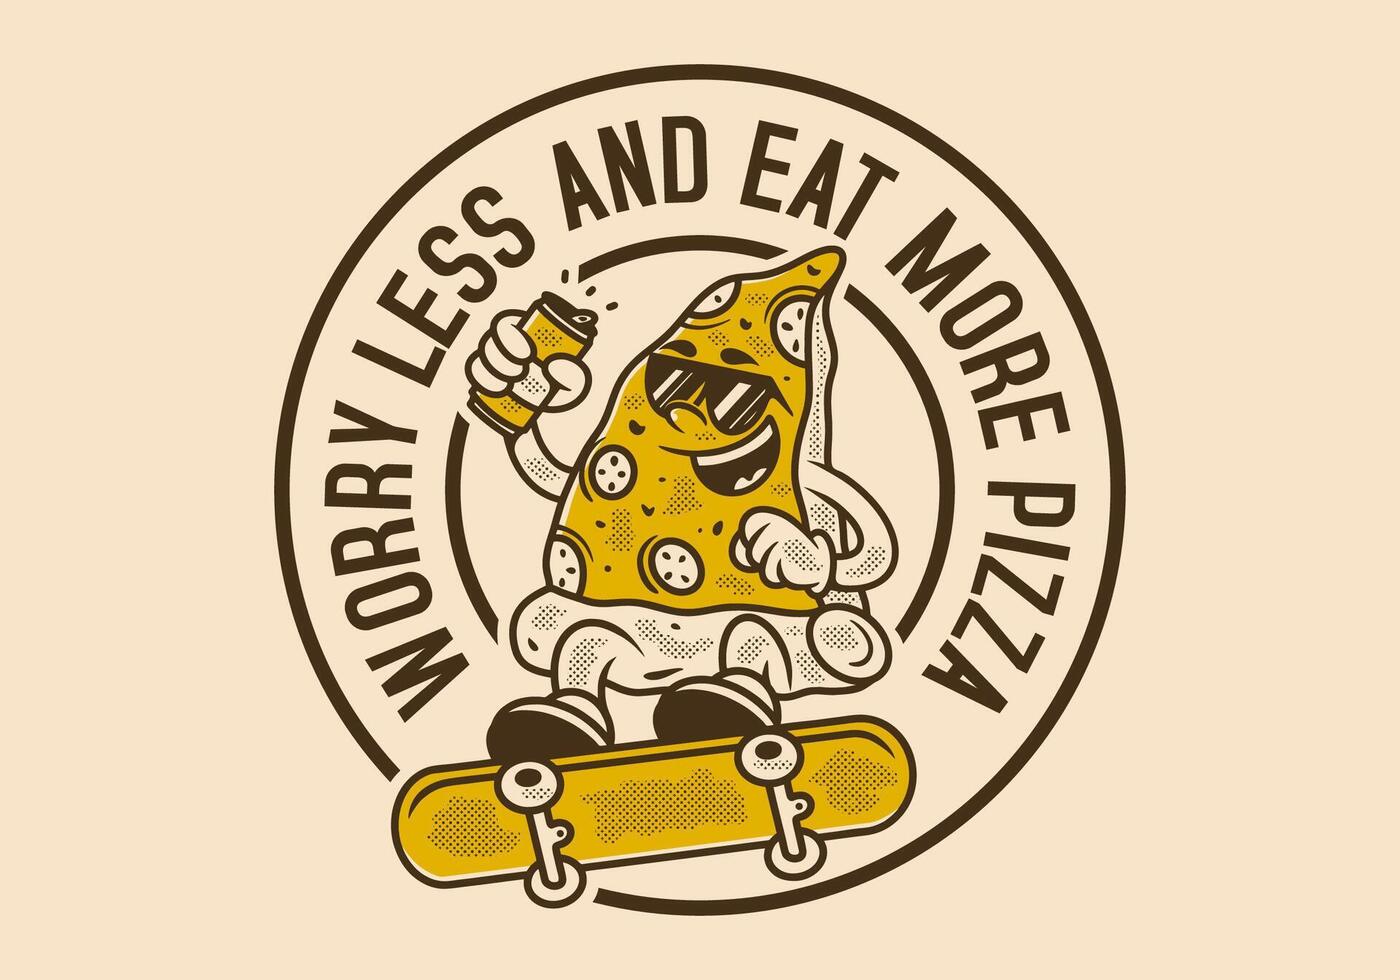 Worry less and eat more pizza. Retro illustration of pizza character jumping on skateboard vector